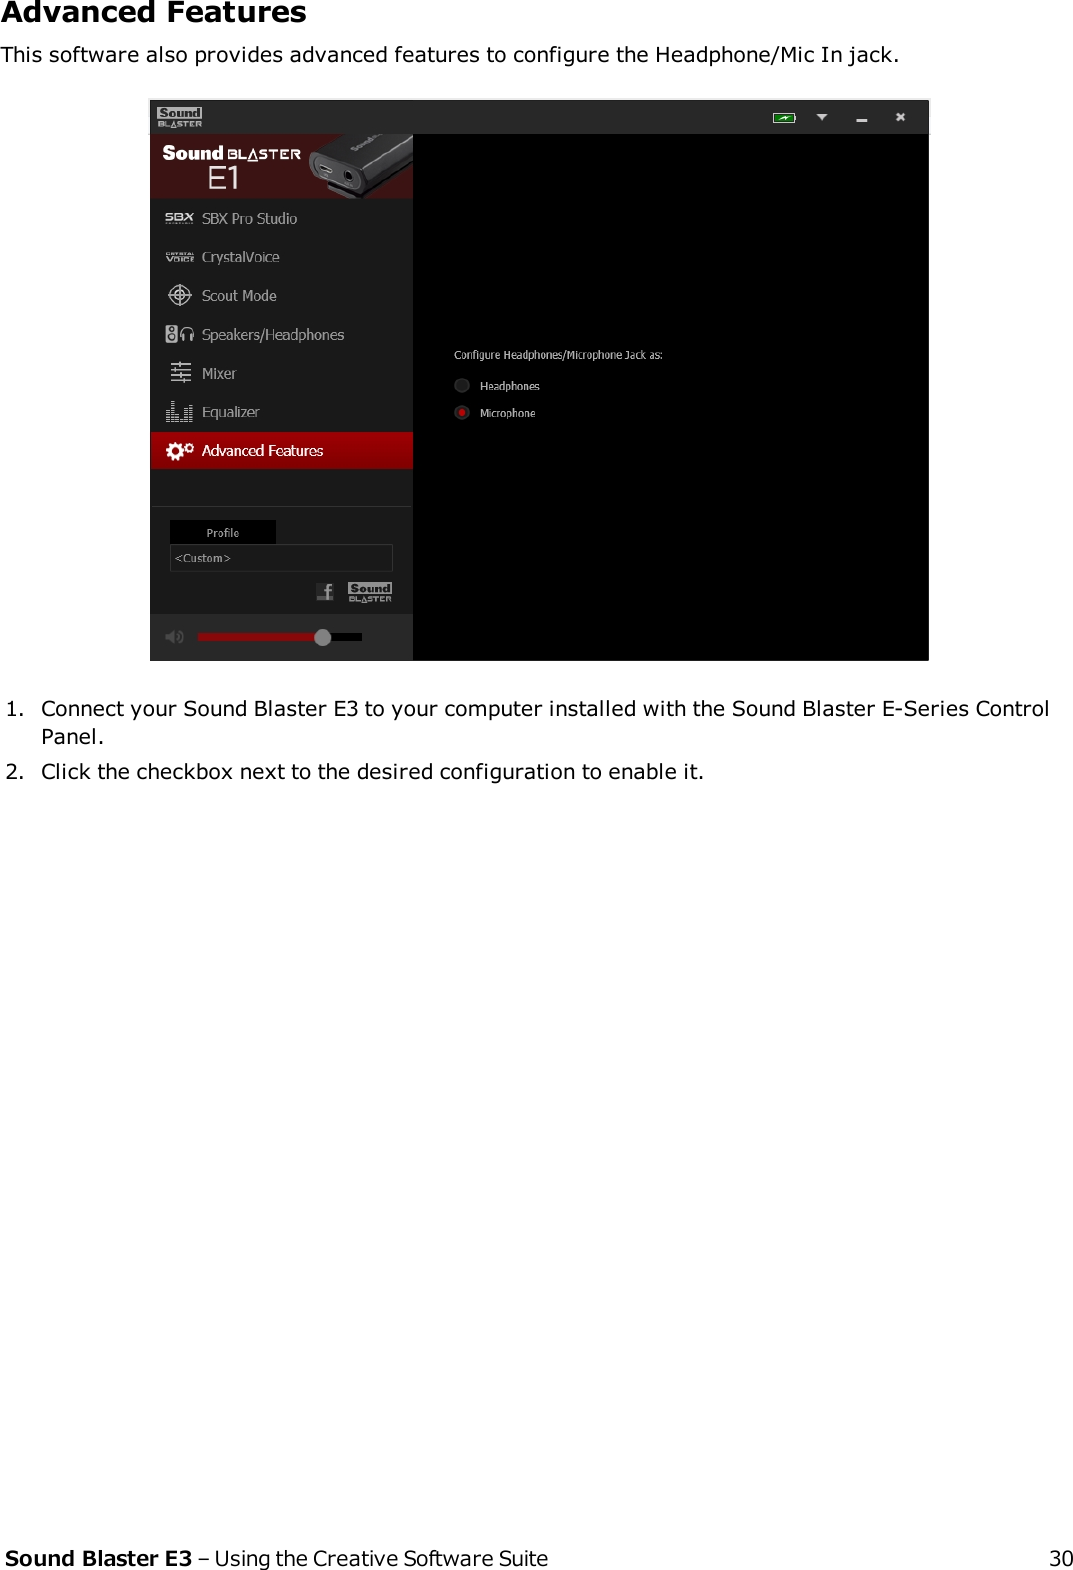 Advanced FeaturesThis software also provides advanced features to configure the Headphone/Mic In jack.1. Connect your Sound Blaster E3 to your computer installed with the Sound Blaster E-Series ControlPanel.2. Click the checkbox next to the desired configuration to enable it.Sound Blaster E3 – Using the Creative Software Suite 30